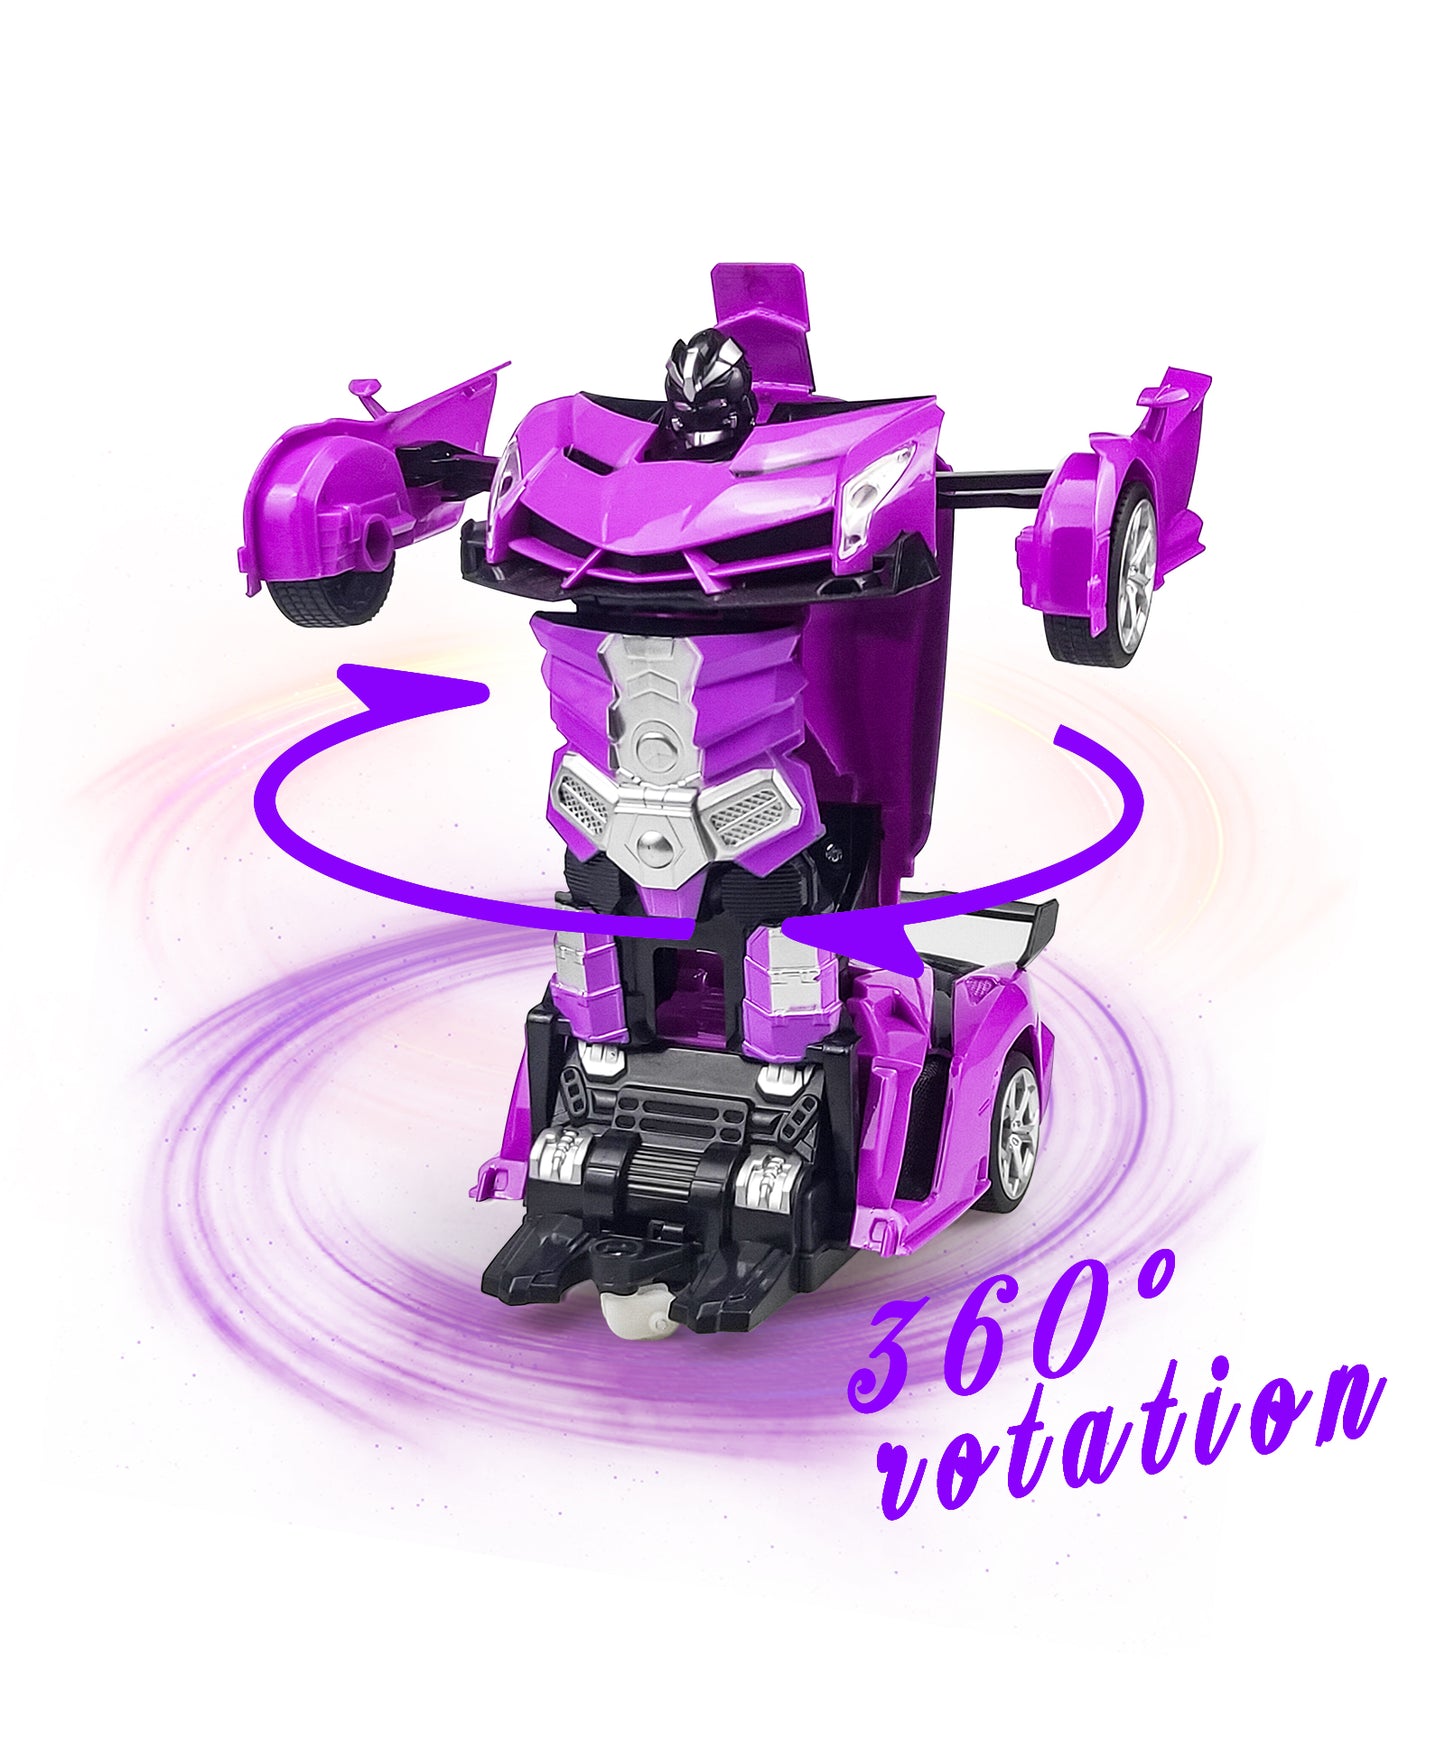 Remote Control Car Transform Car Robot Toy for Girls Kids,1:18 Scale High Speed RC Cars Racing Car with 360°Rotating for Boys 3 4 5 6 7 8 9 Years Old Birthday-Purple